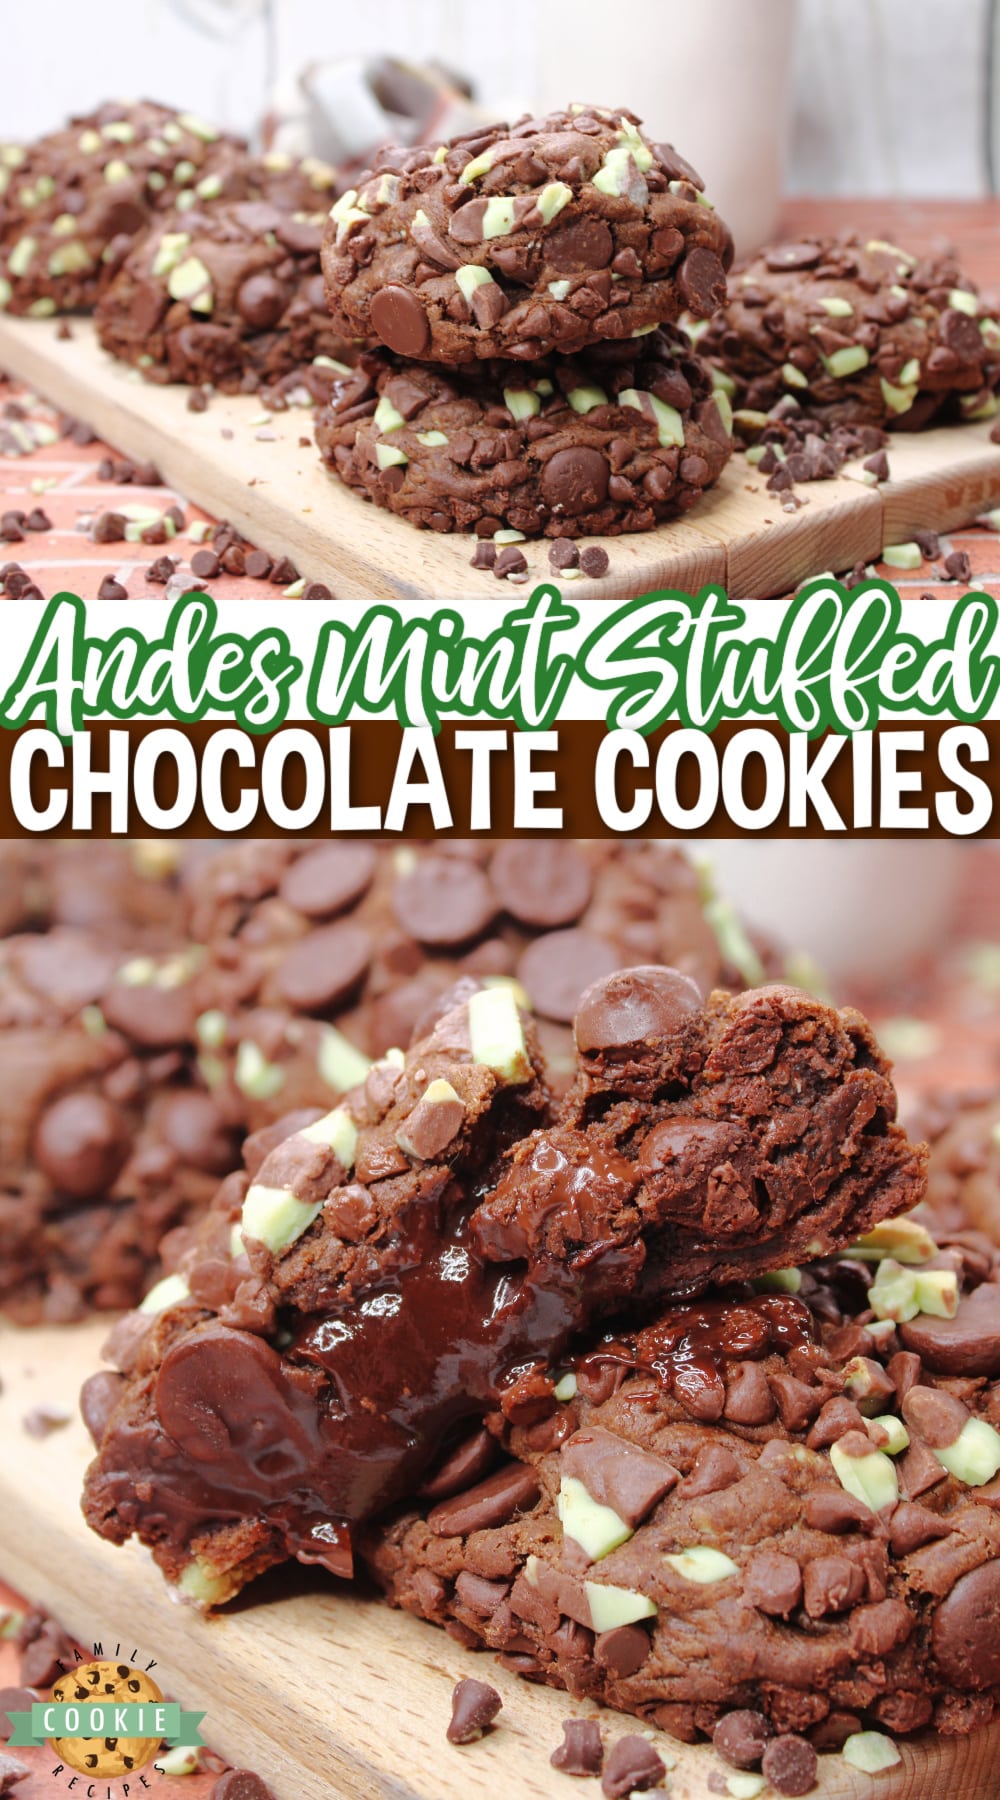 Andes Mint Stuffed Chocolate Cookies are rich chocolate mint cookies that are filled with chocolate ganache and a grasshopper cookie in the middle. Tons of mint flavor in this amazing chocolate cookie recipe!  